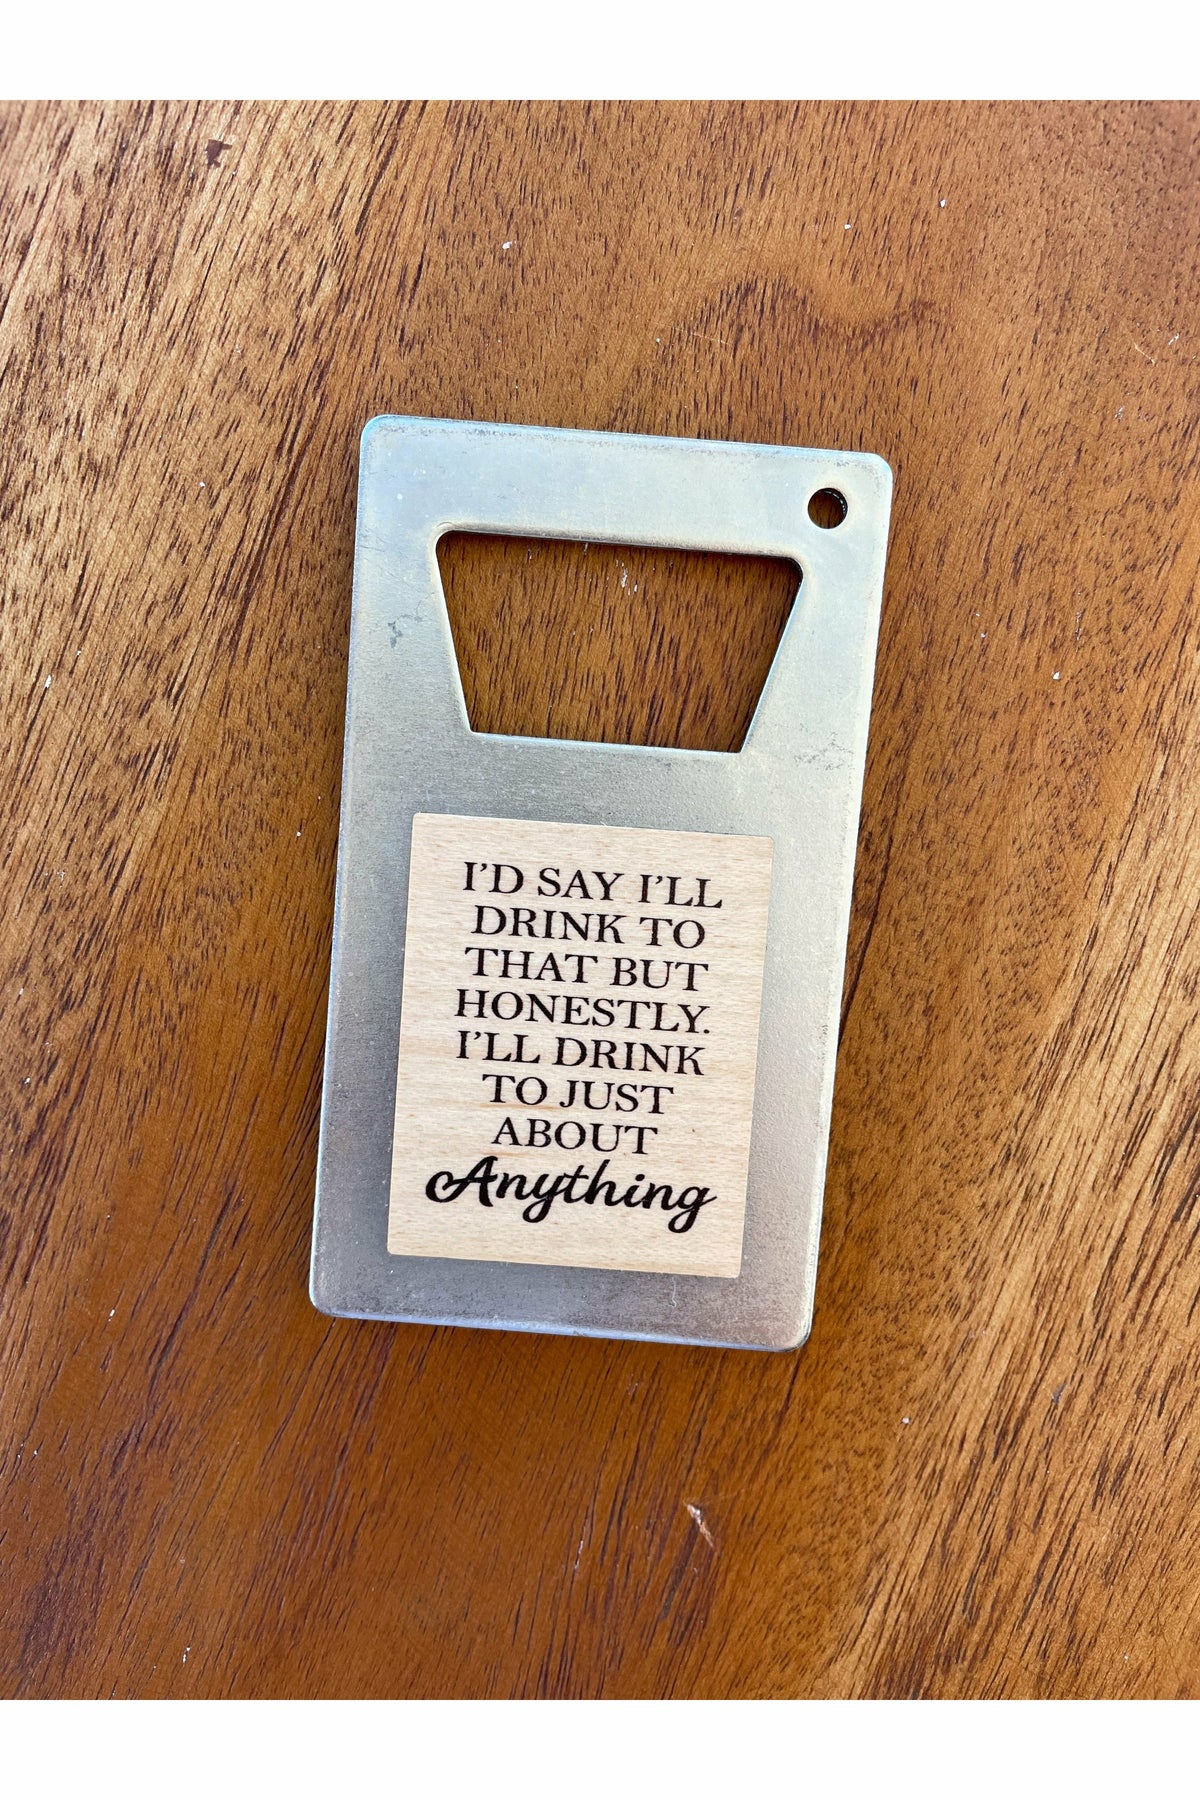 I'll Drink to just about anything bottle opener